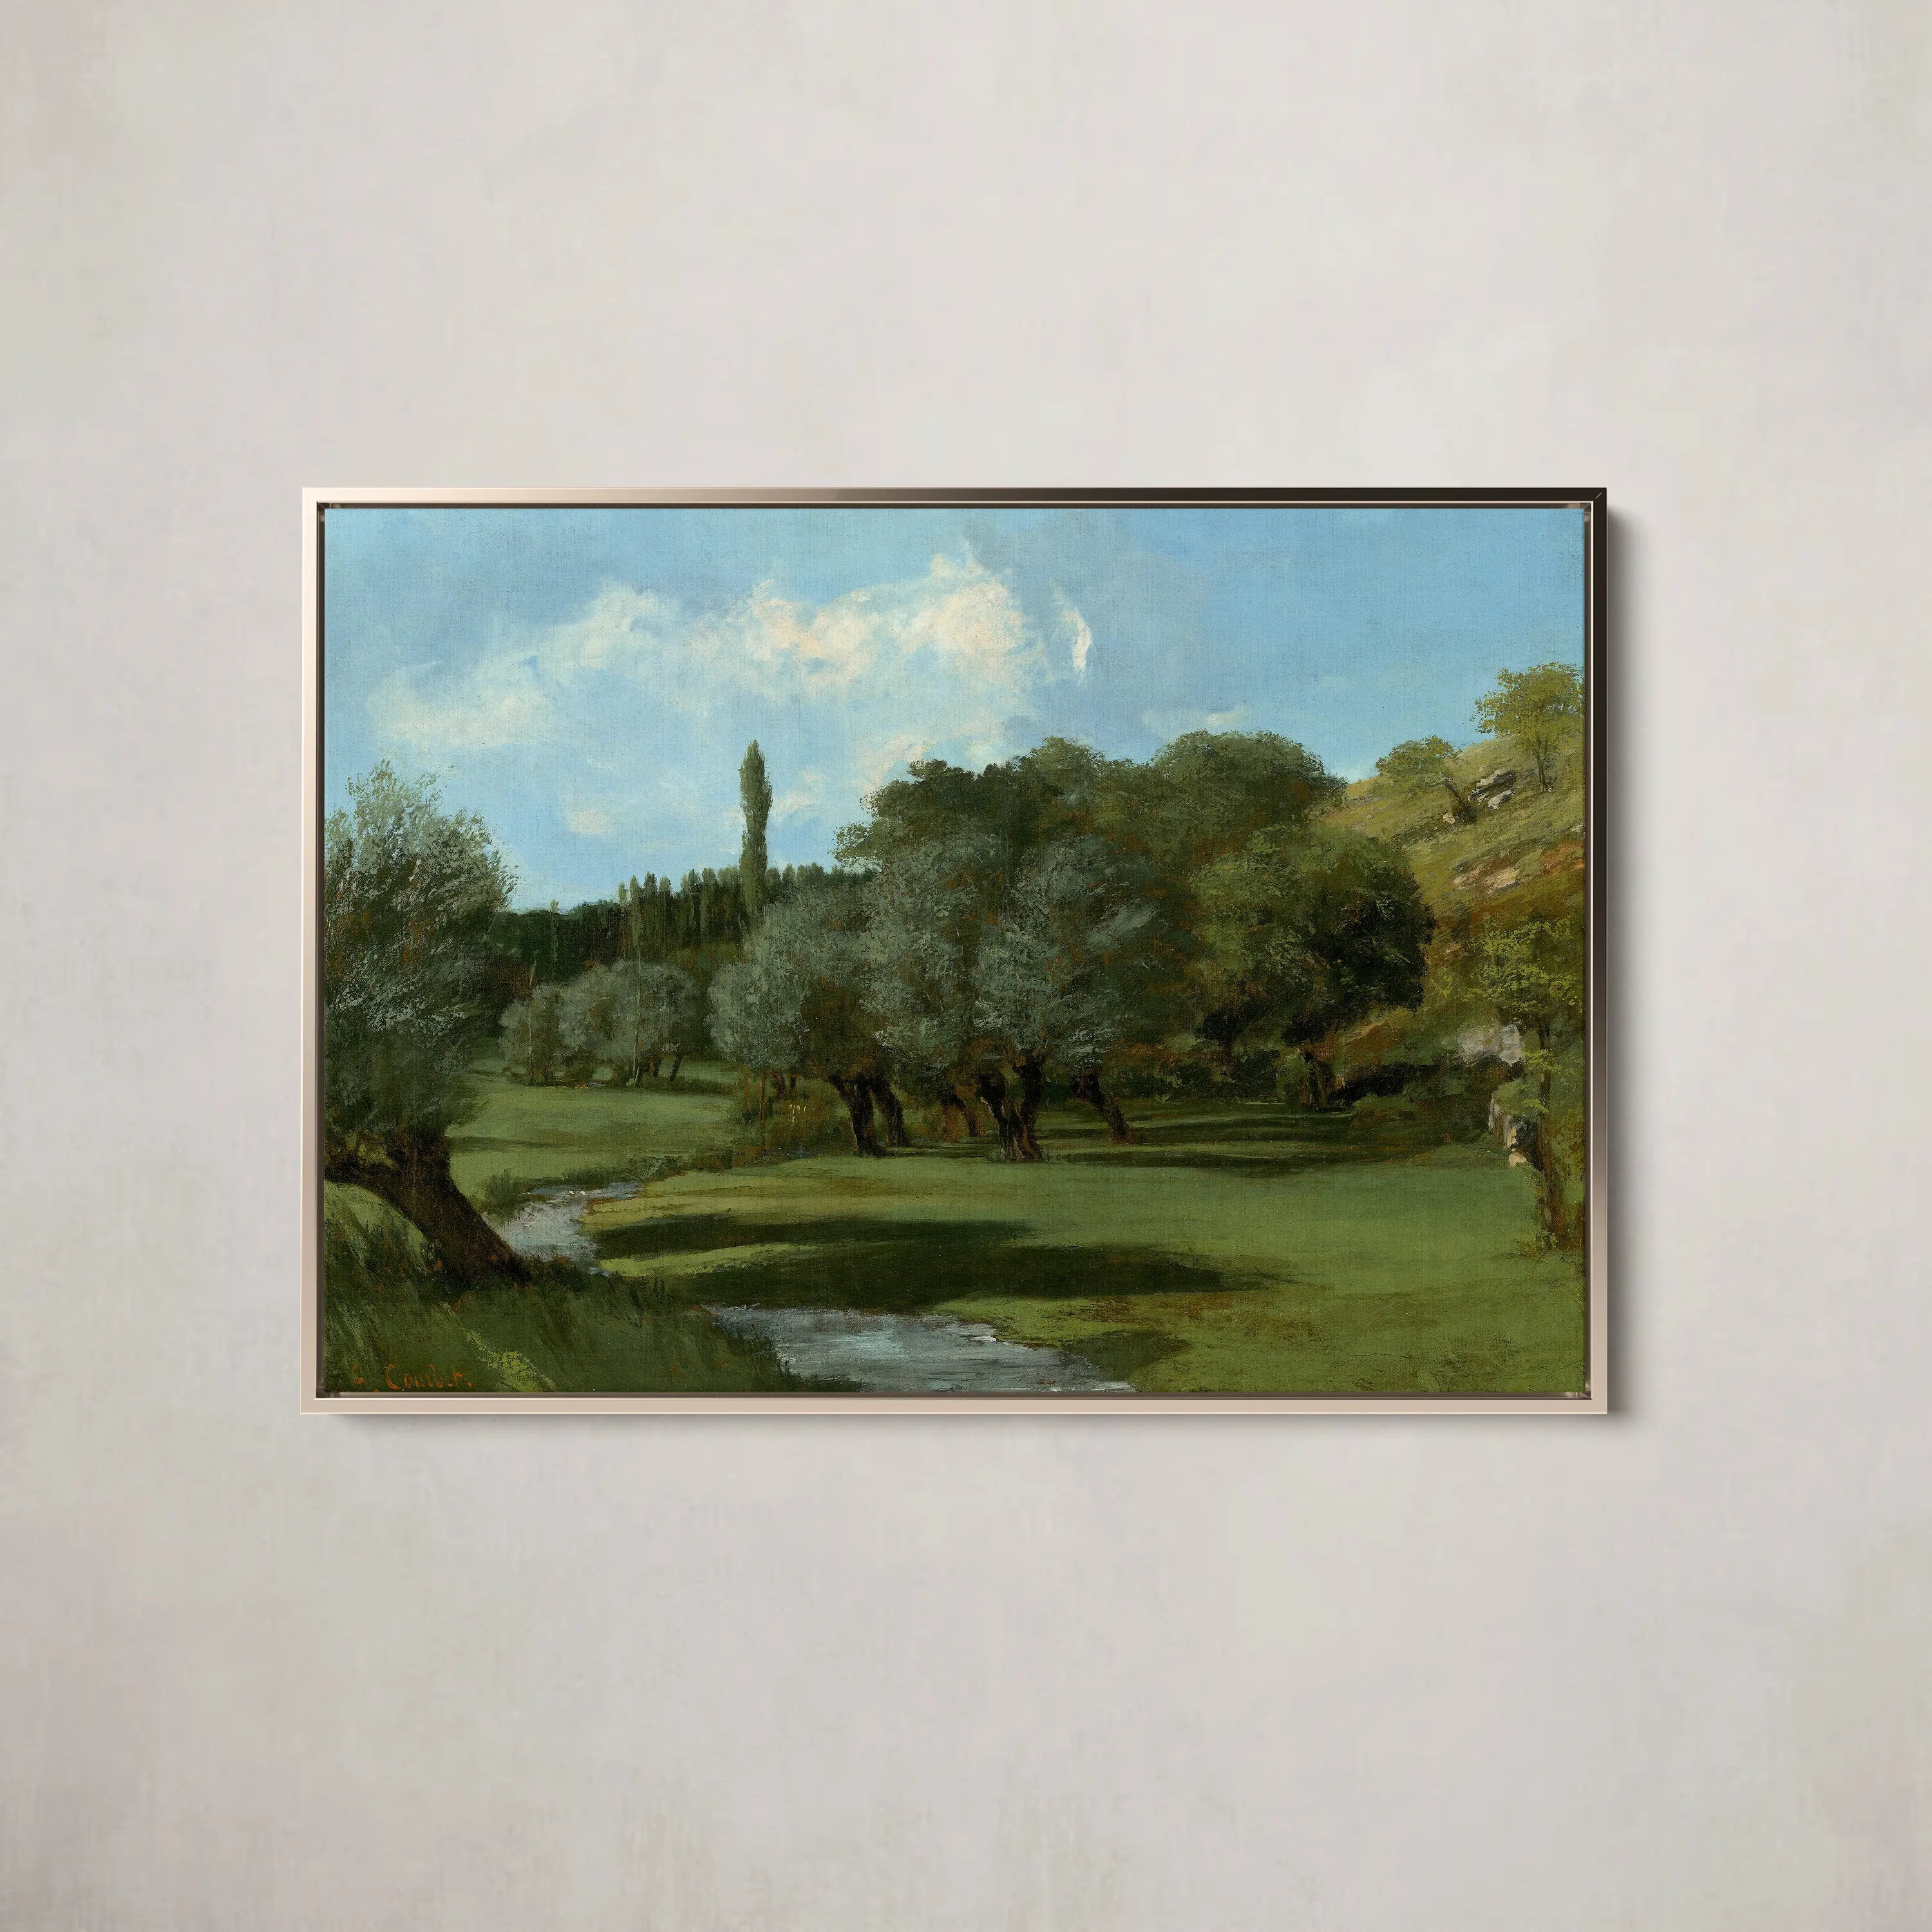 La Bretonnerie in the Department of Indre (1856) by Gustave Courbet